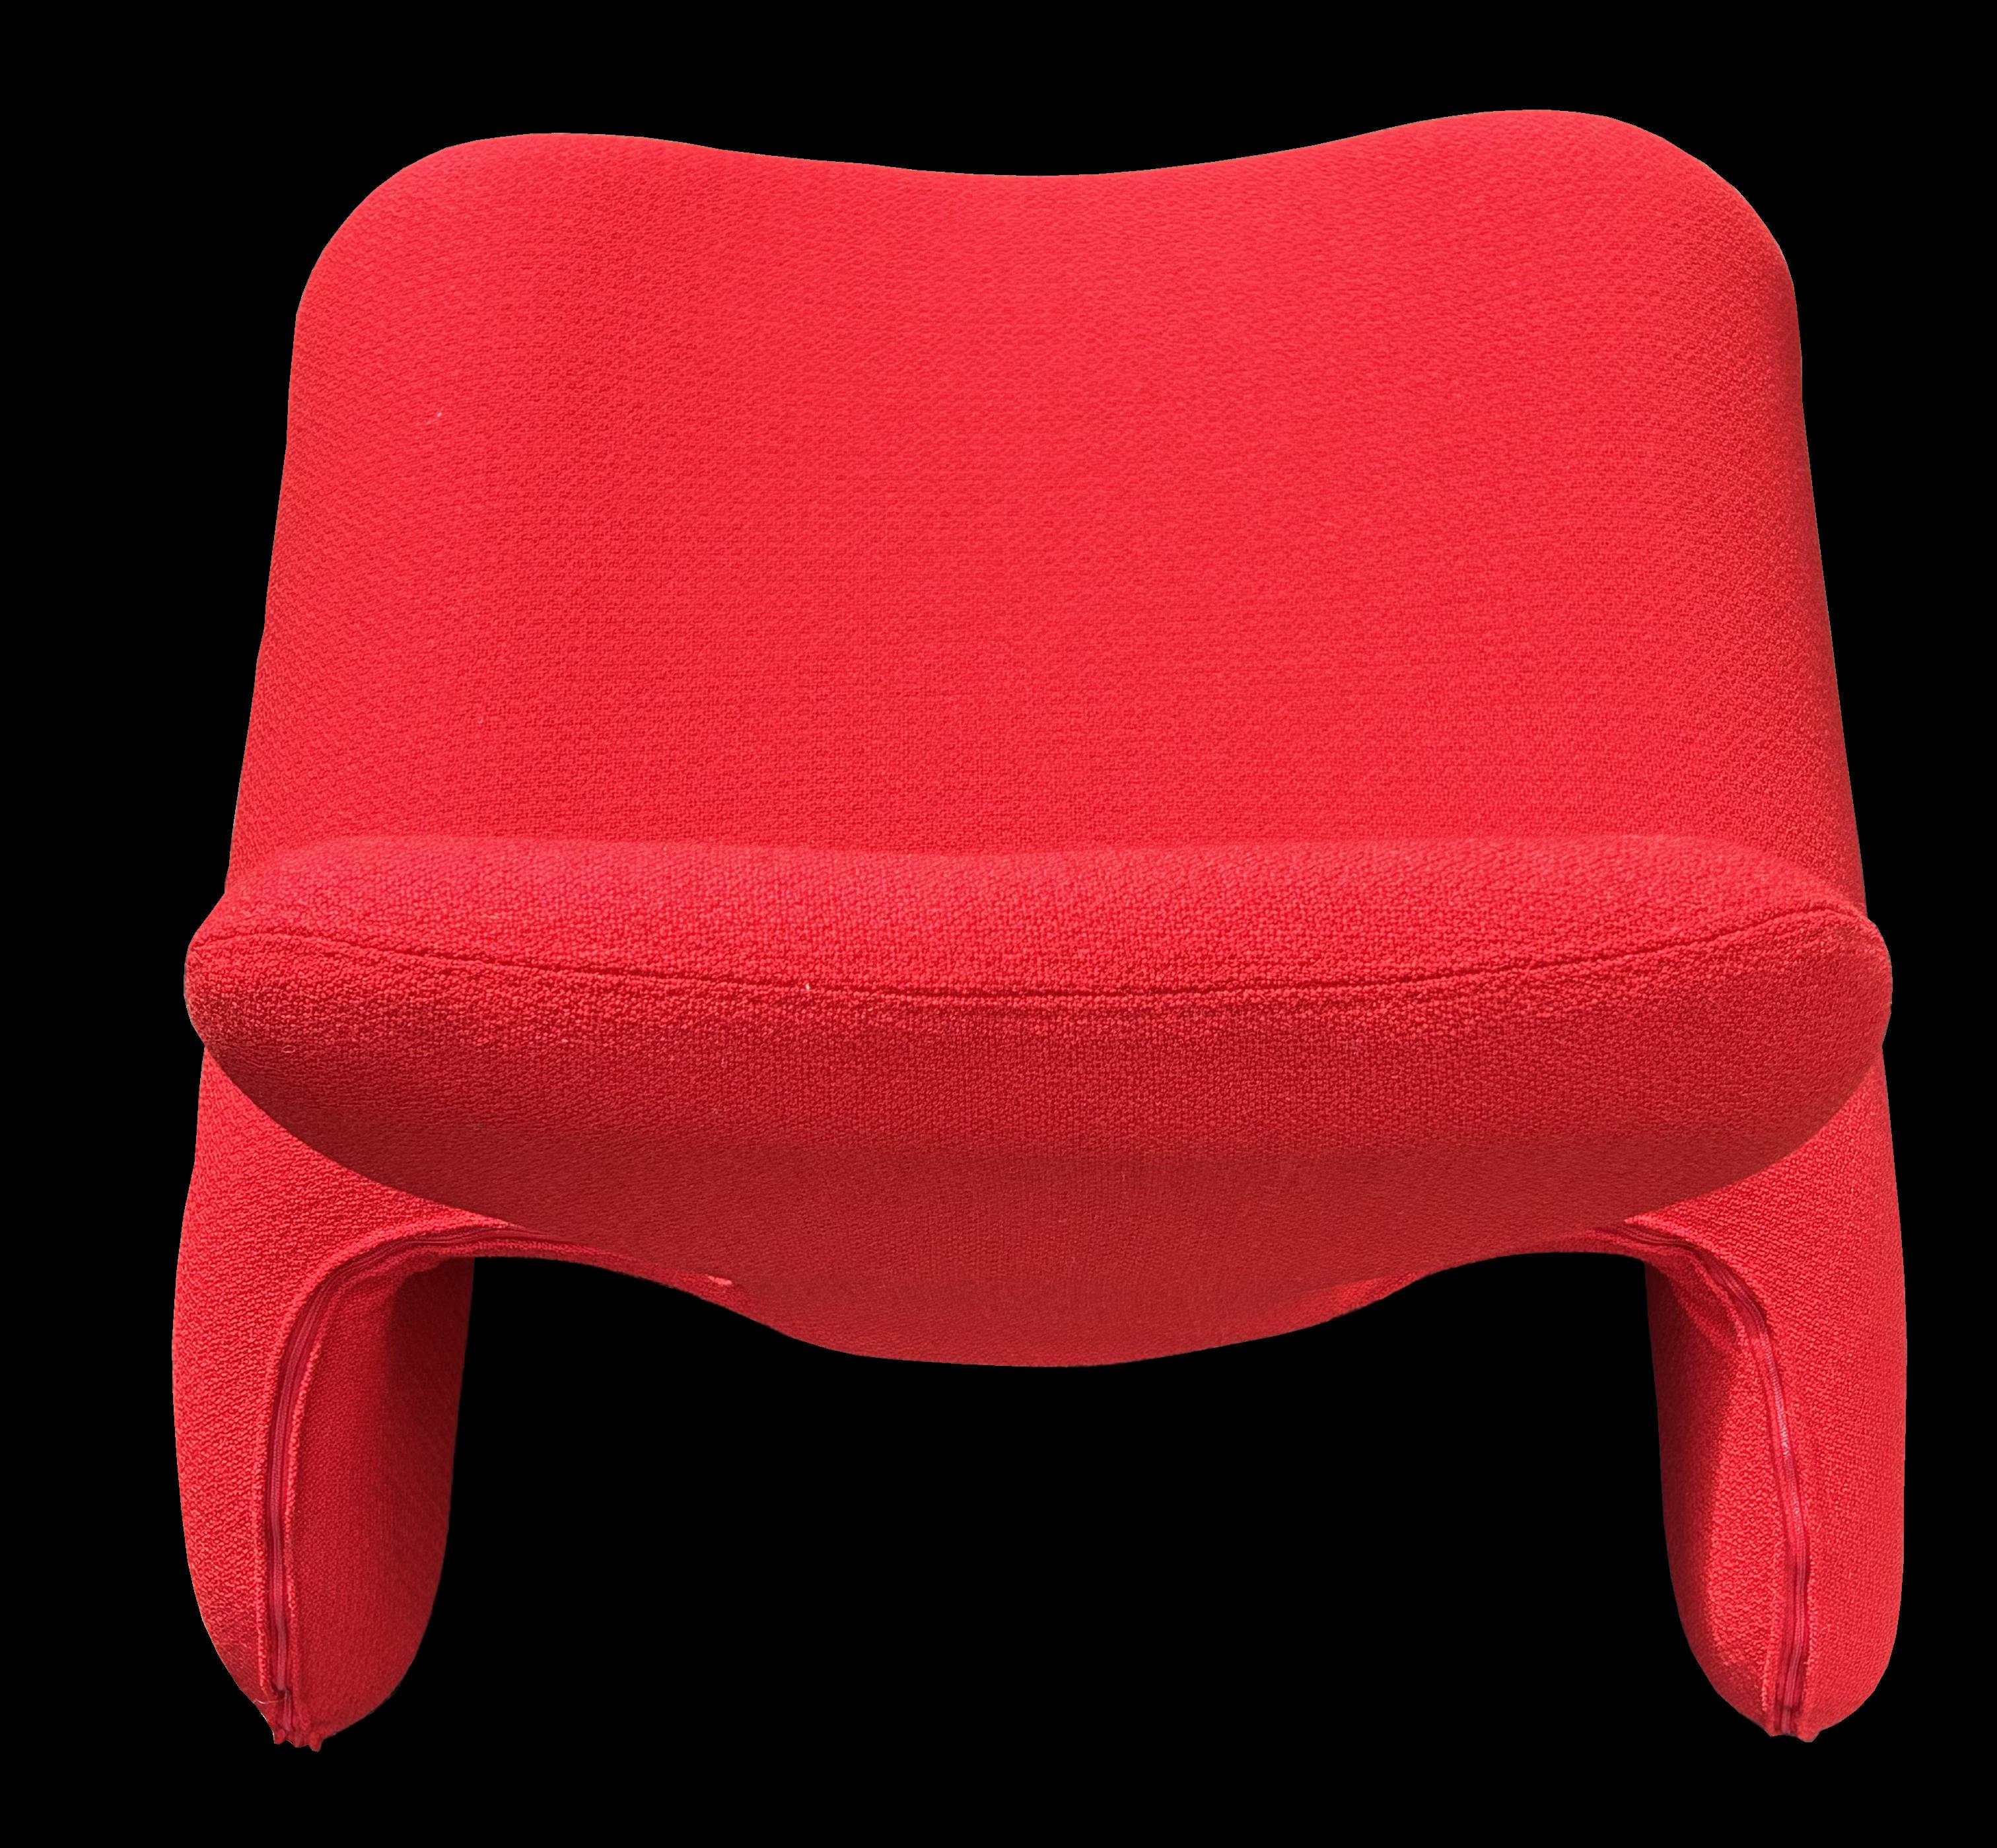 This is an original Djinn chair, as seen in 2001 a Space Odysee, the frame has been rewebbed, refoamed to current fire safety regulations and recovered in a top quality red stretch fabric from Knoll International, and now is a beautiful example of